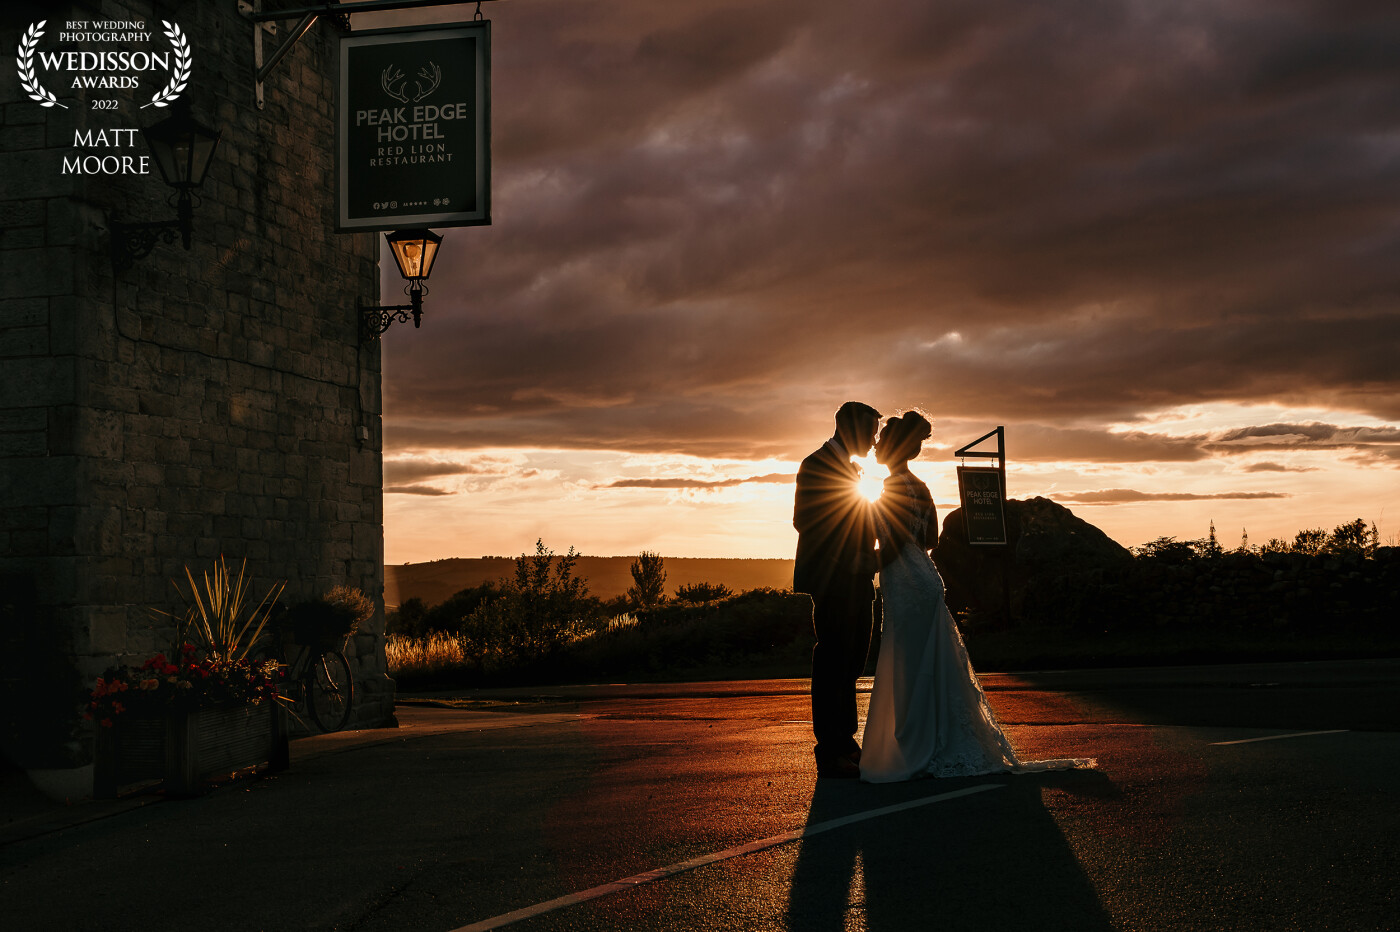 Bruce and Siana enjoyed the evening sunshine late on their summer wedding day and were treated to this beautiful sunset outside the peak Edge Hotel in Chesterfield. A fitting image for such a beautiful day